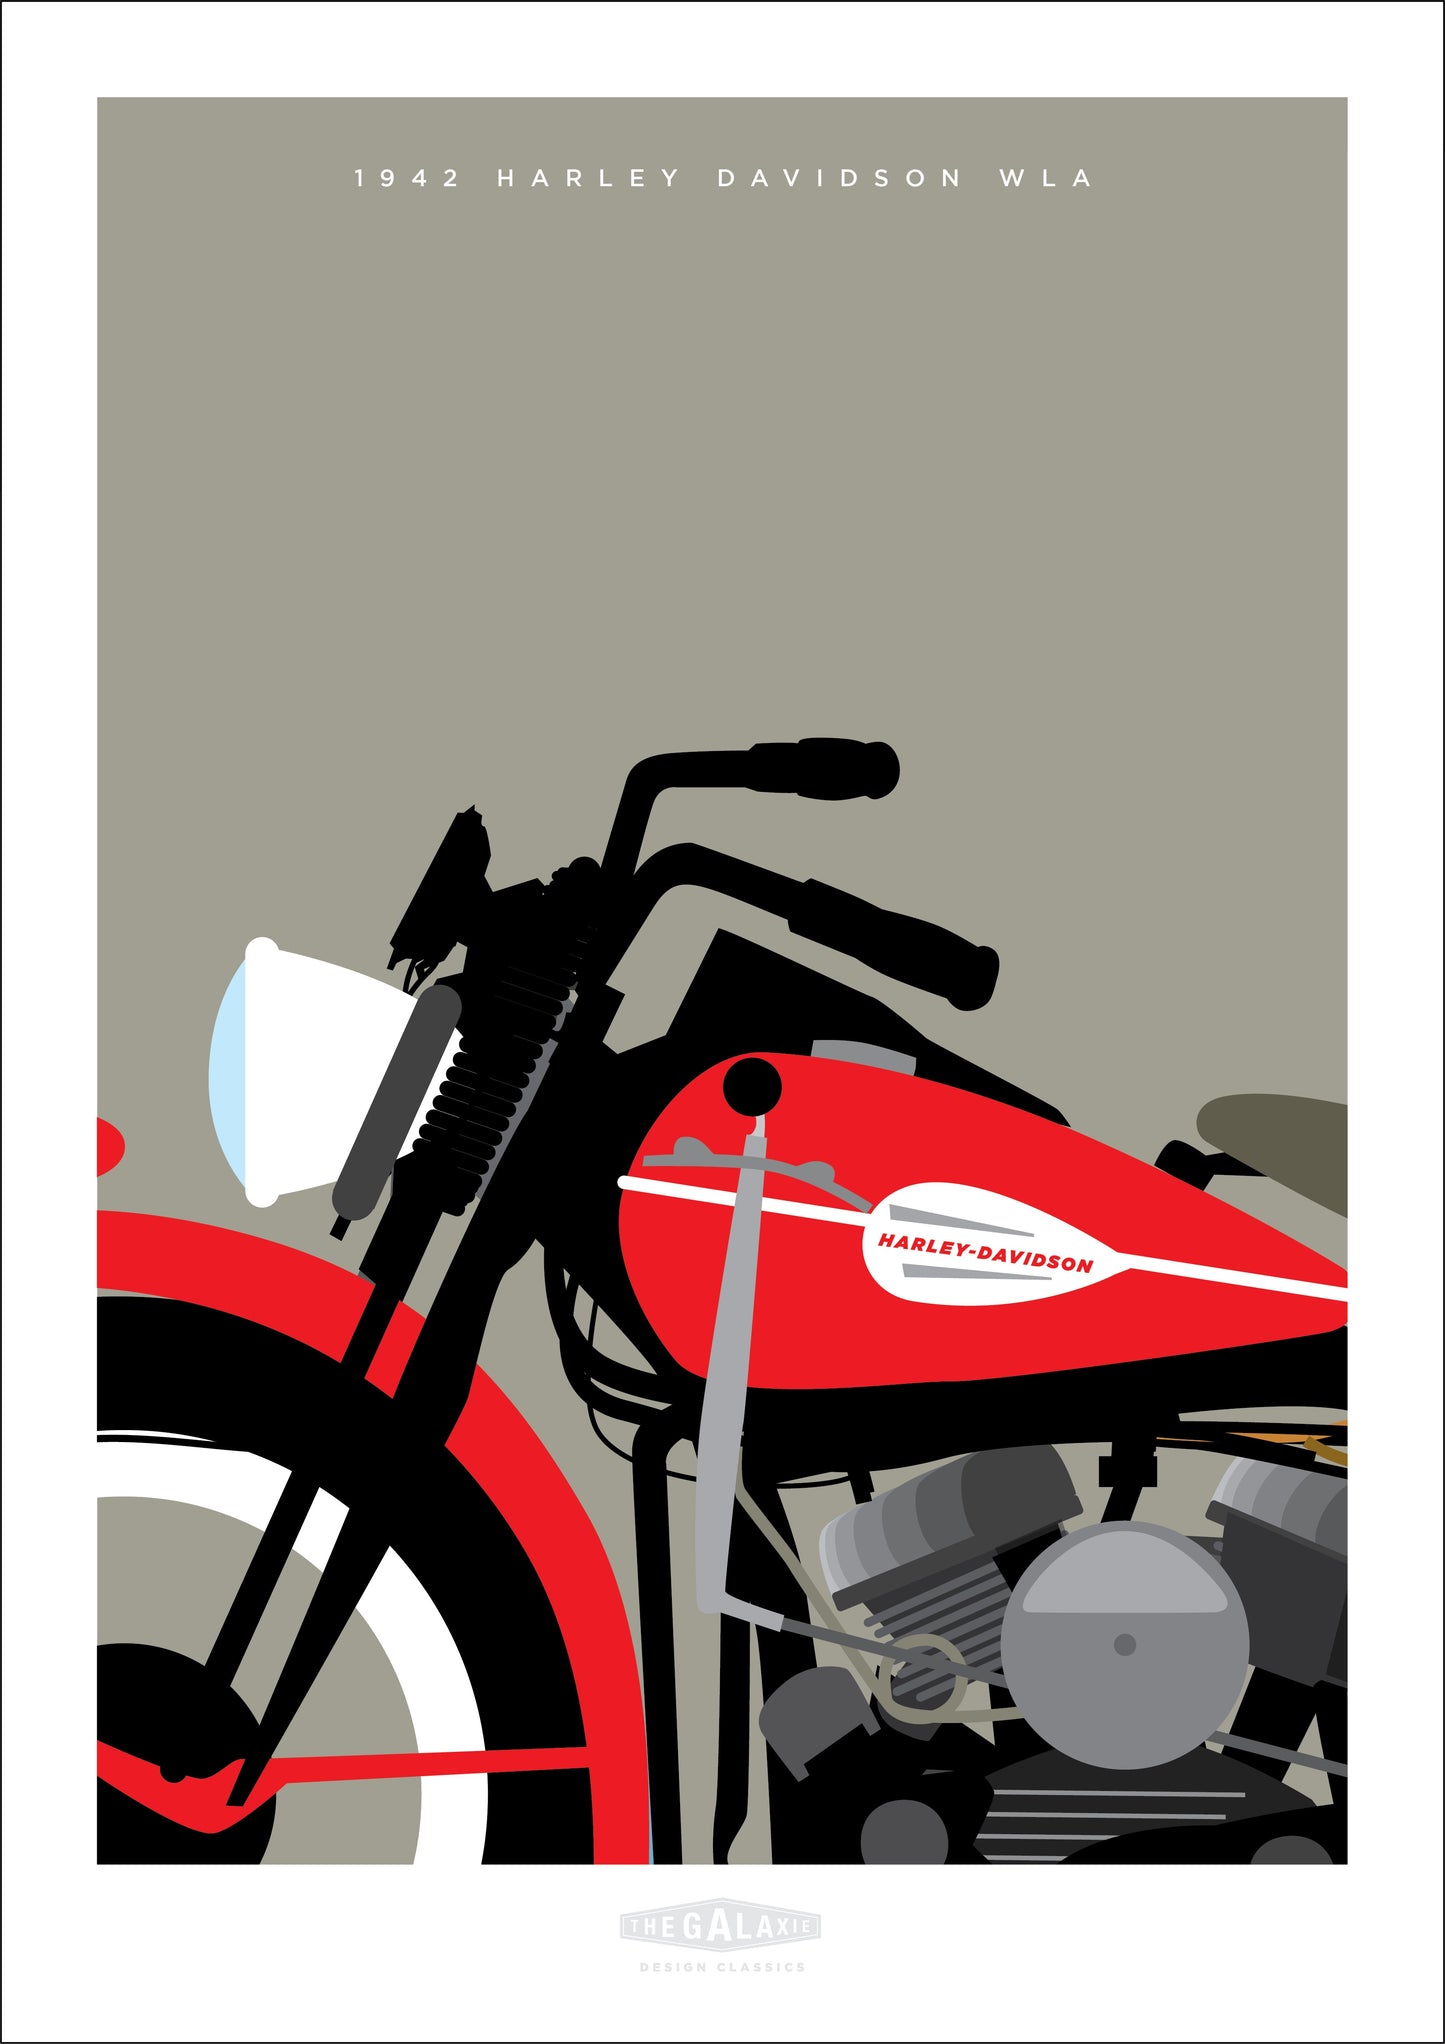 Hand drawn print of a classic red 1942 Harley Davidson WLA on a grey background.